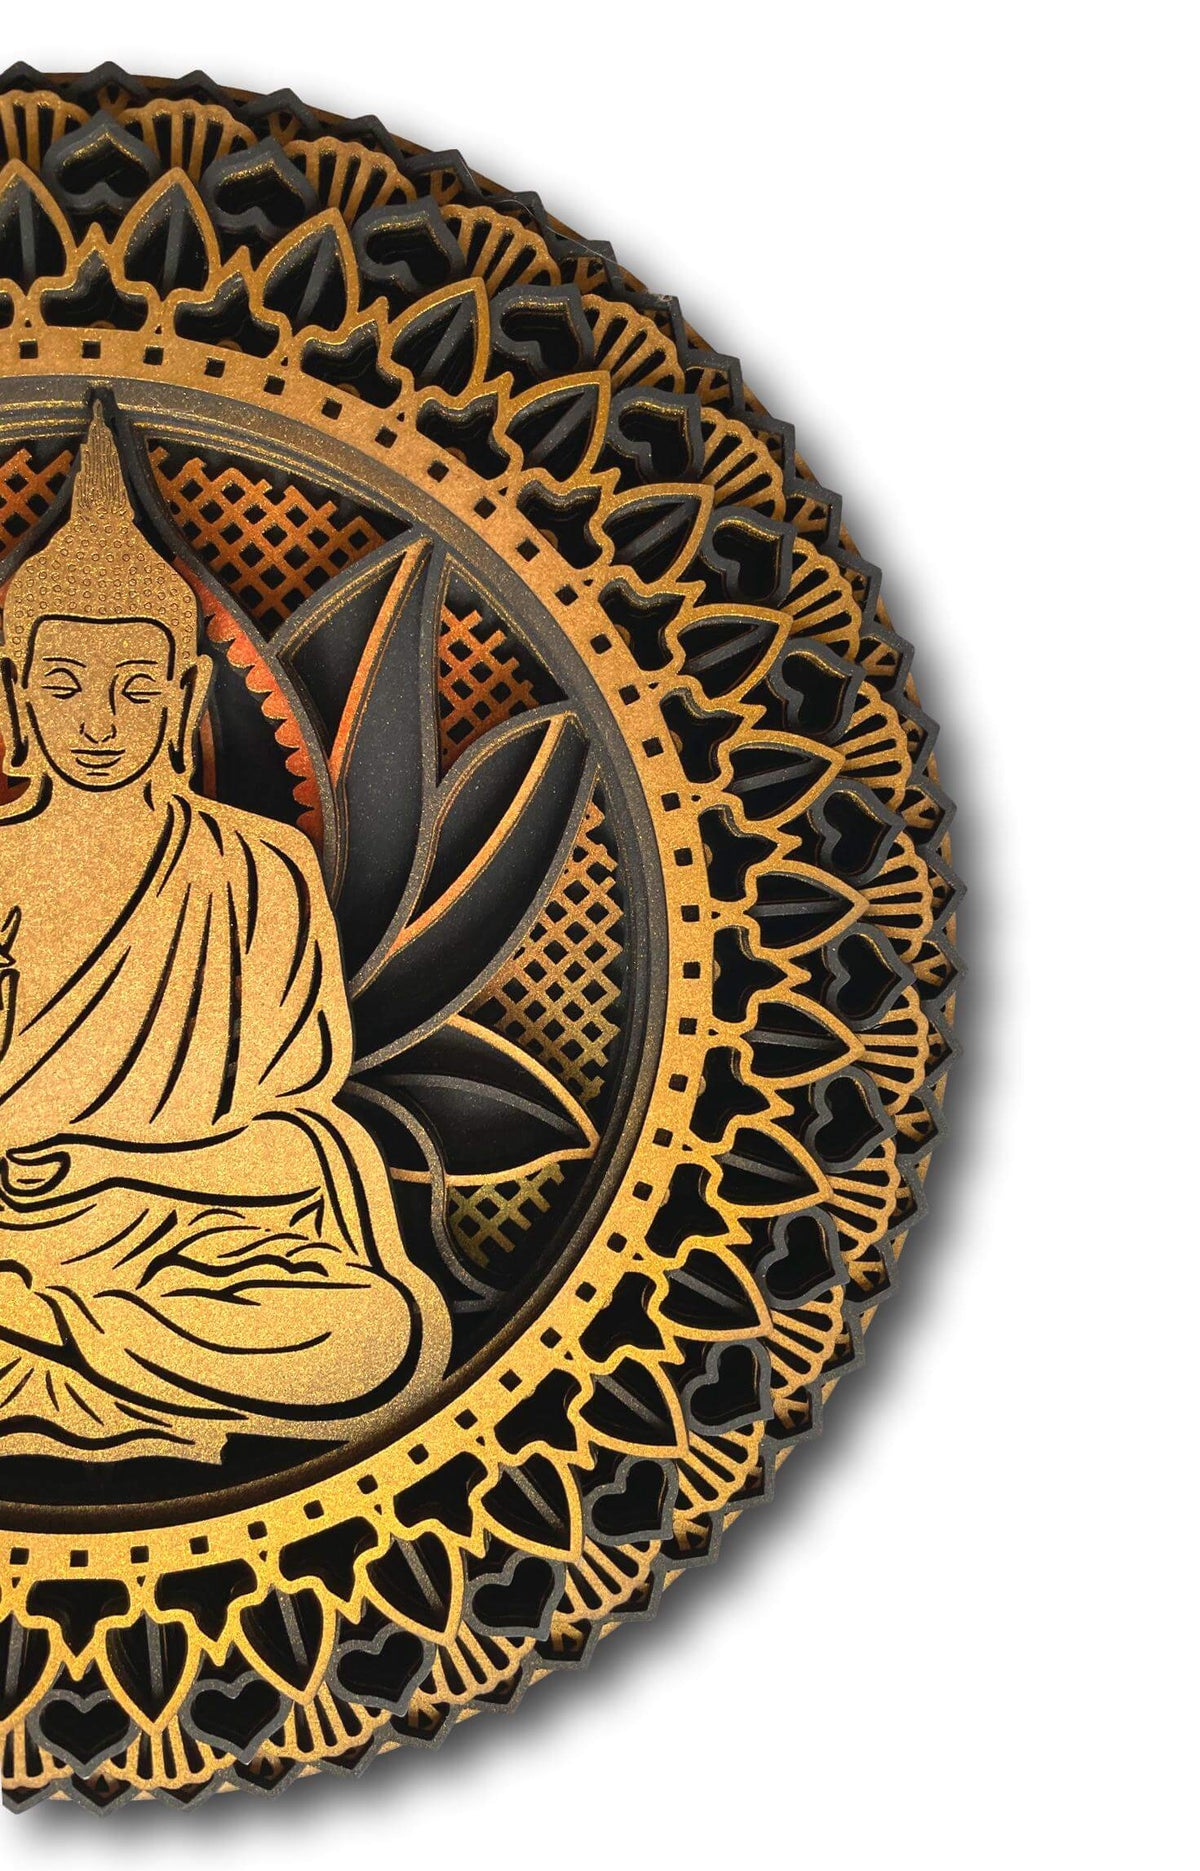 Unique Gold Buddha Wall Art - Intricate Wooden Sacred Geometry Decor- Handmade In Thailand 🇹🇭